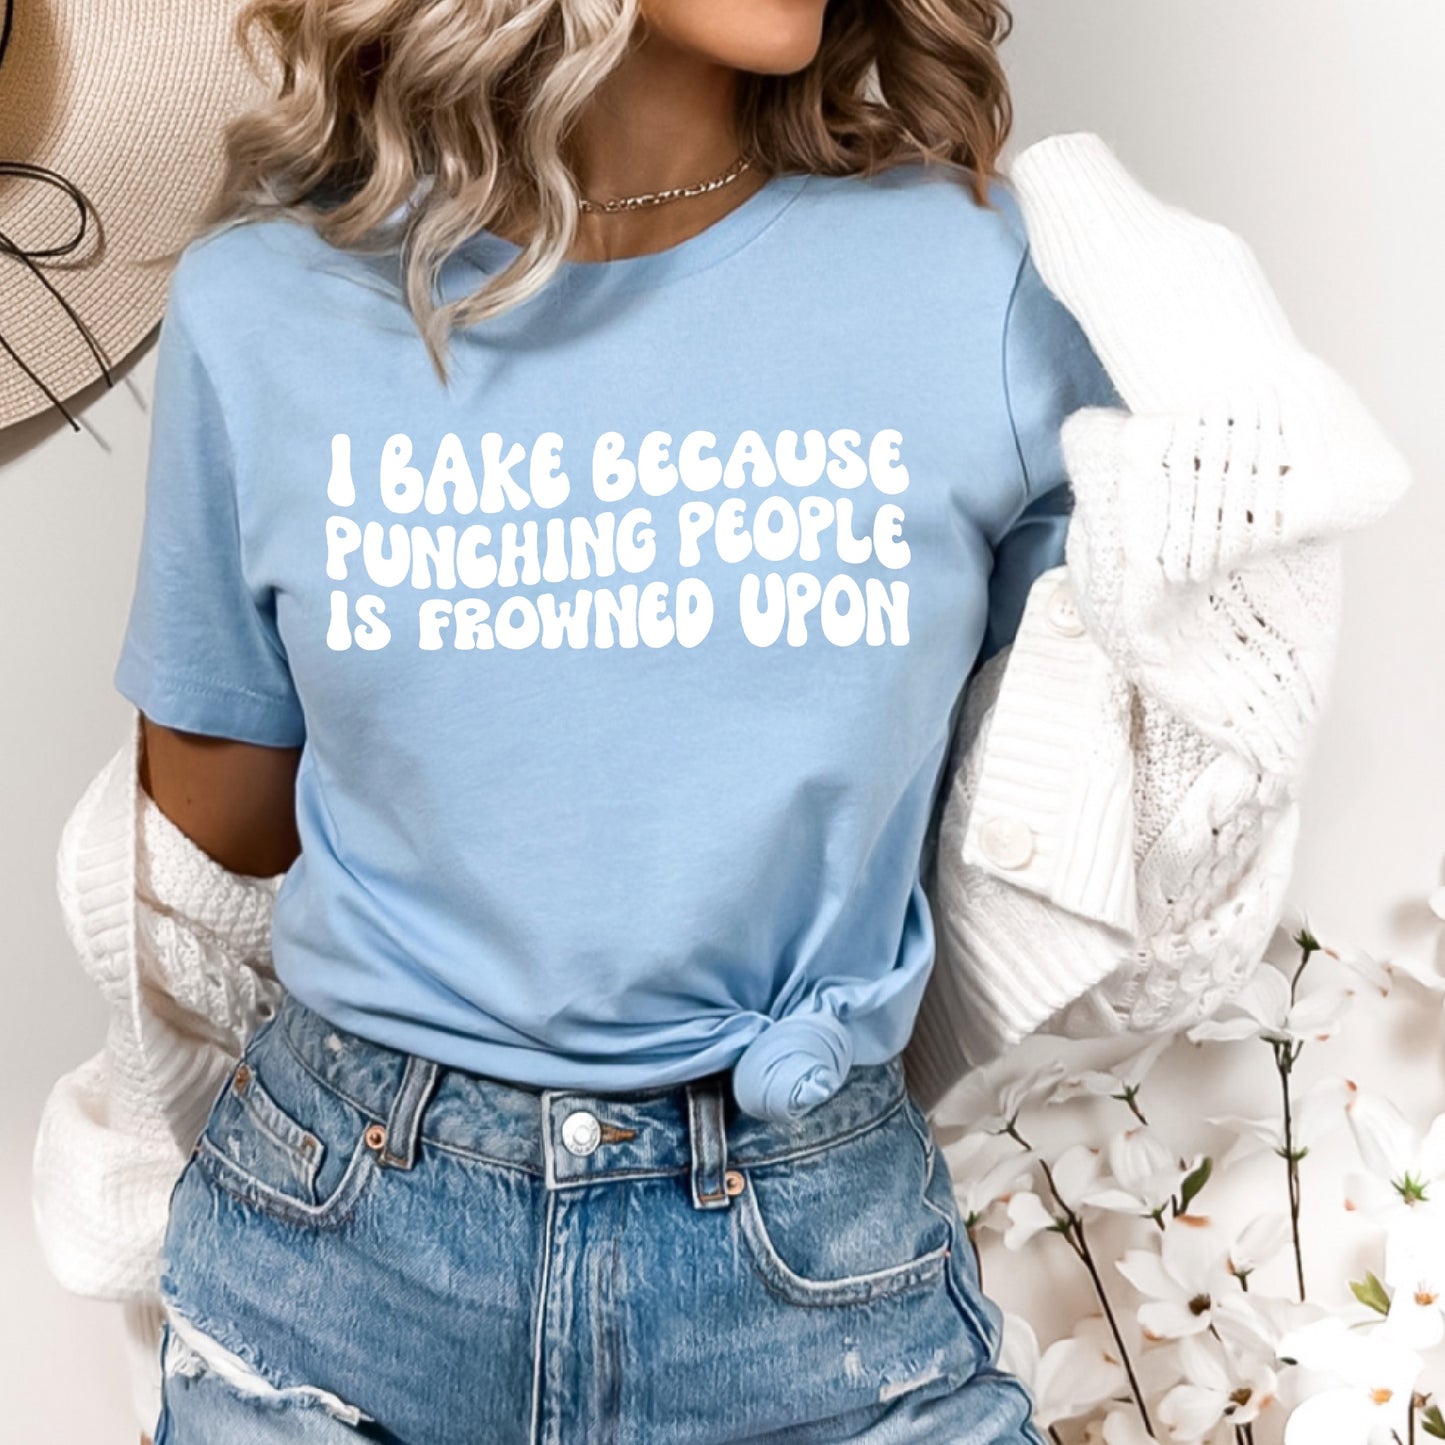 I Bake Because Punching People is Frowned Upon Unisex Tee